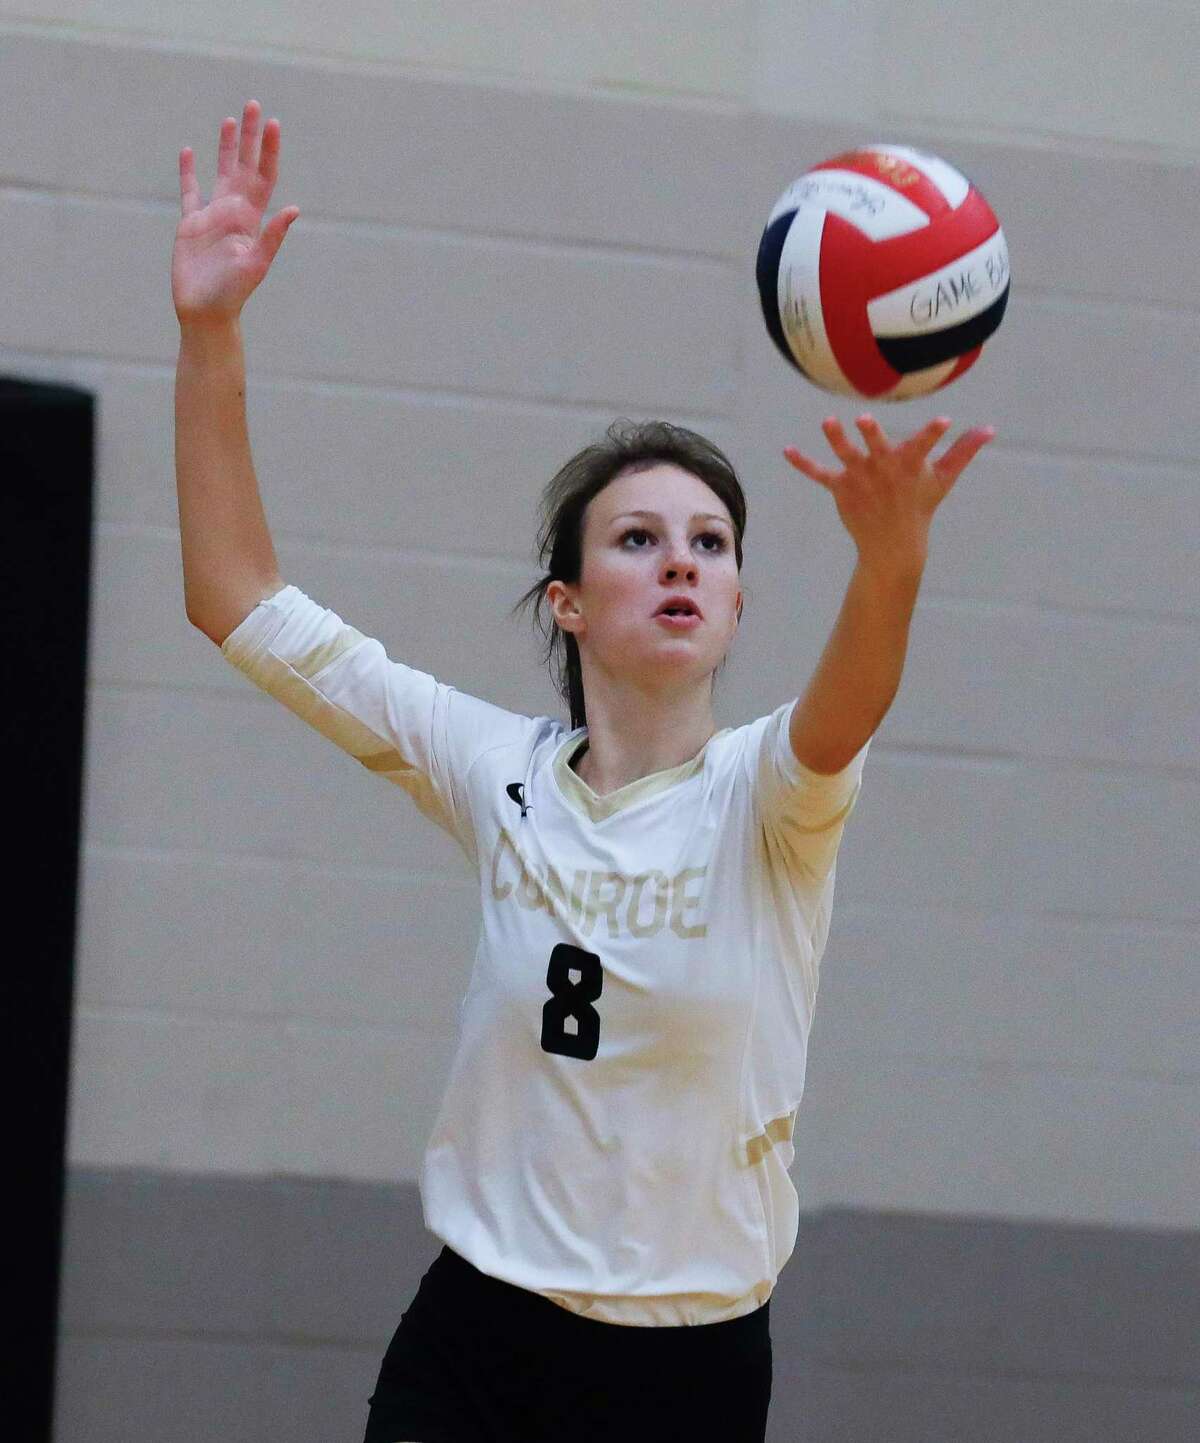 Conroe middle blocker Brooklyn Spikes (8) serves the ball during the third set of a non-district high school volleyball match at Conroe High School, Wednesday, Sept. 15, 2021, in Conroe.